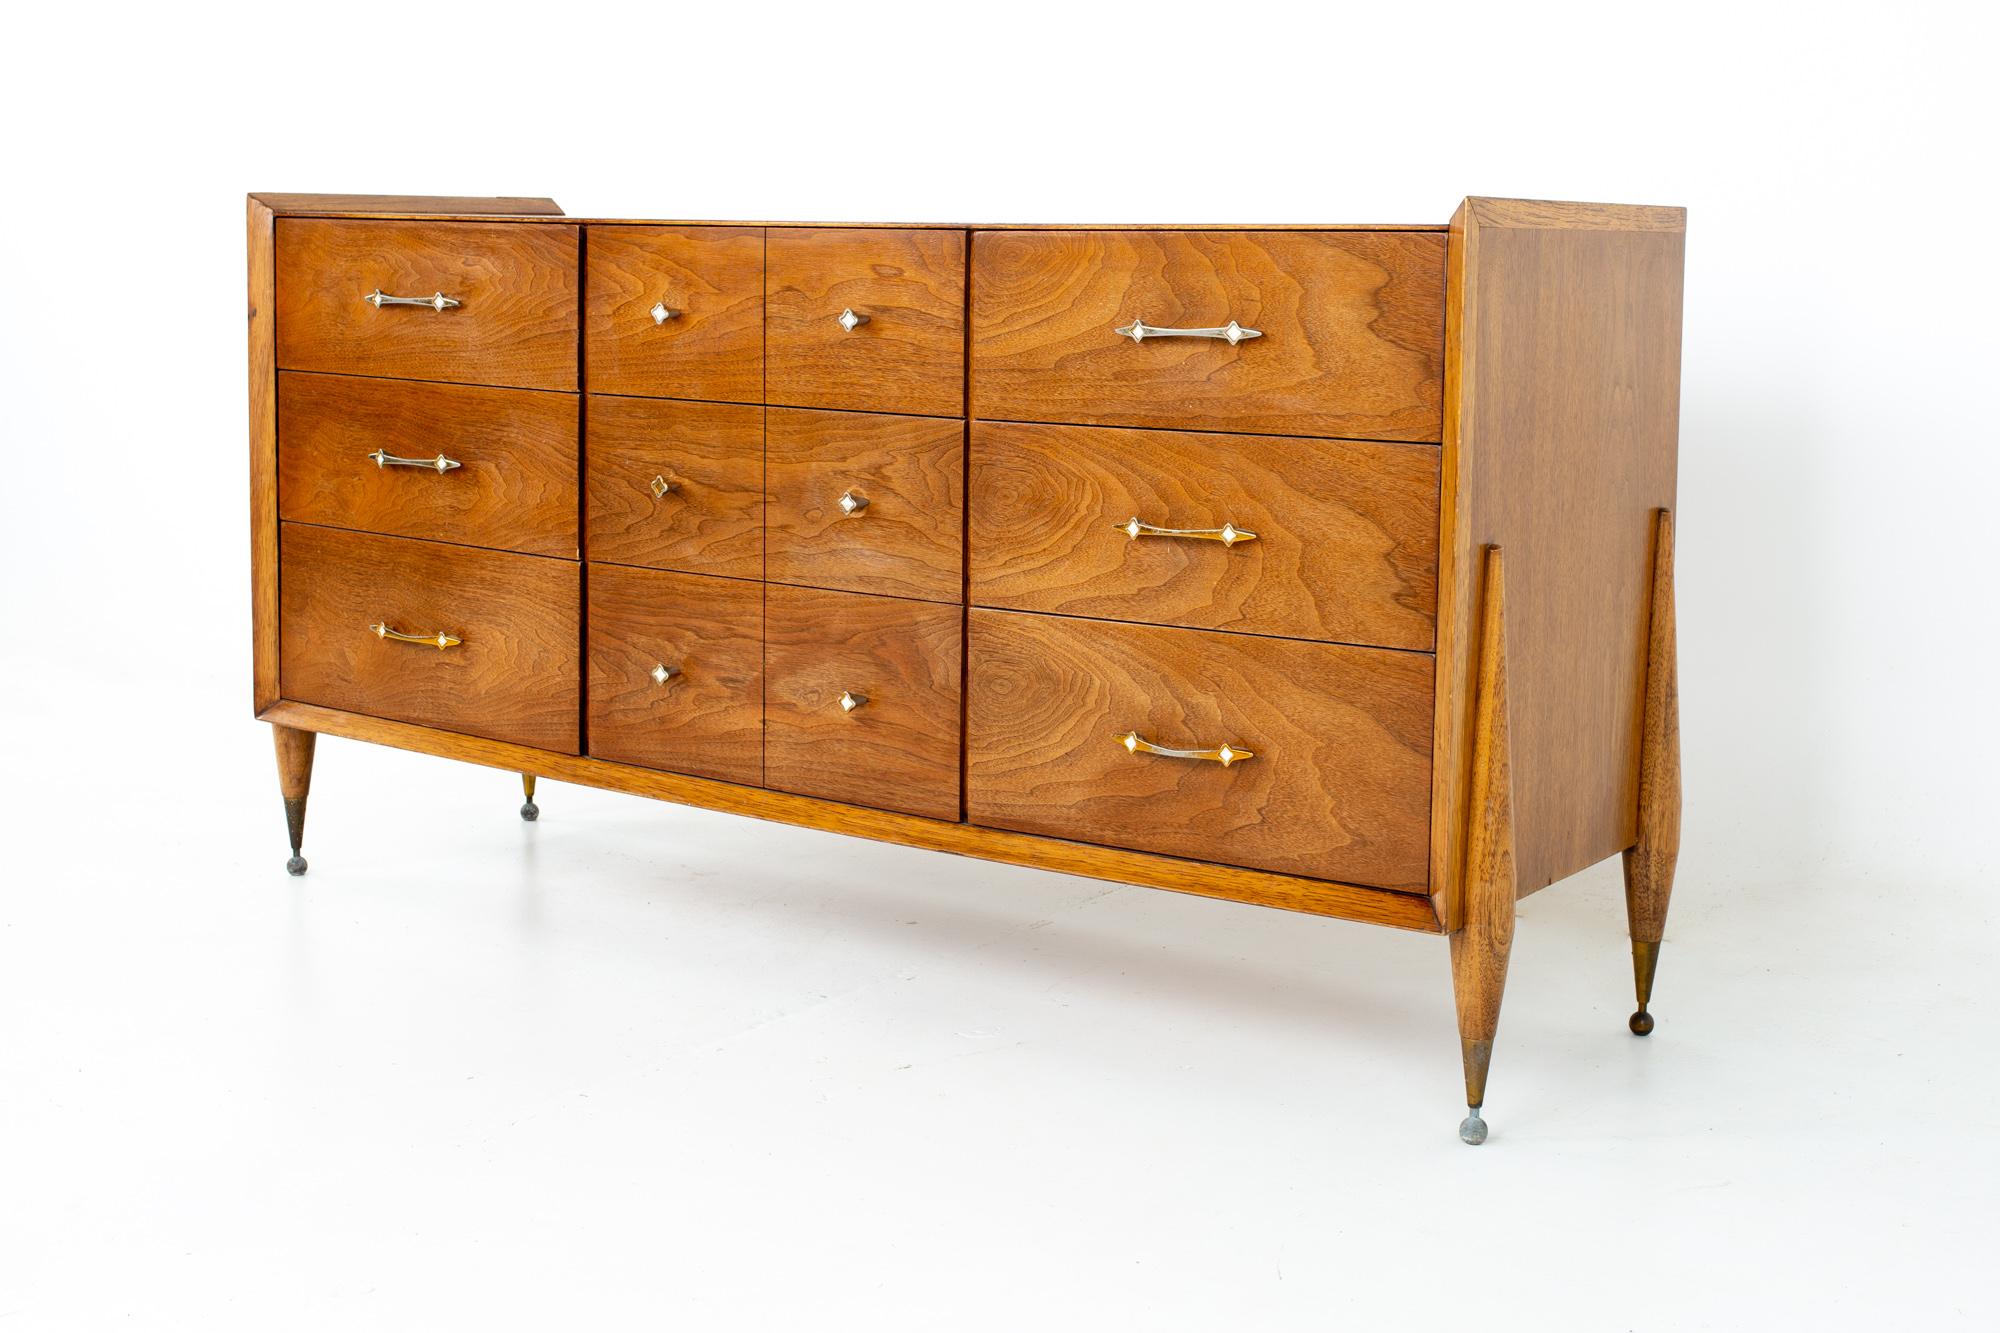 William Hinn style Kent Coffey mid century auburn walnut and pecan 9 drawer lowboy dresser
Dresser measures: 63 wide x 20.25 deep x 33 inches high

All pieces of furniture can be had in what we call restored vintage condition. That means the